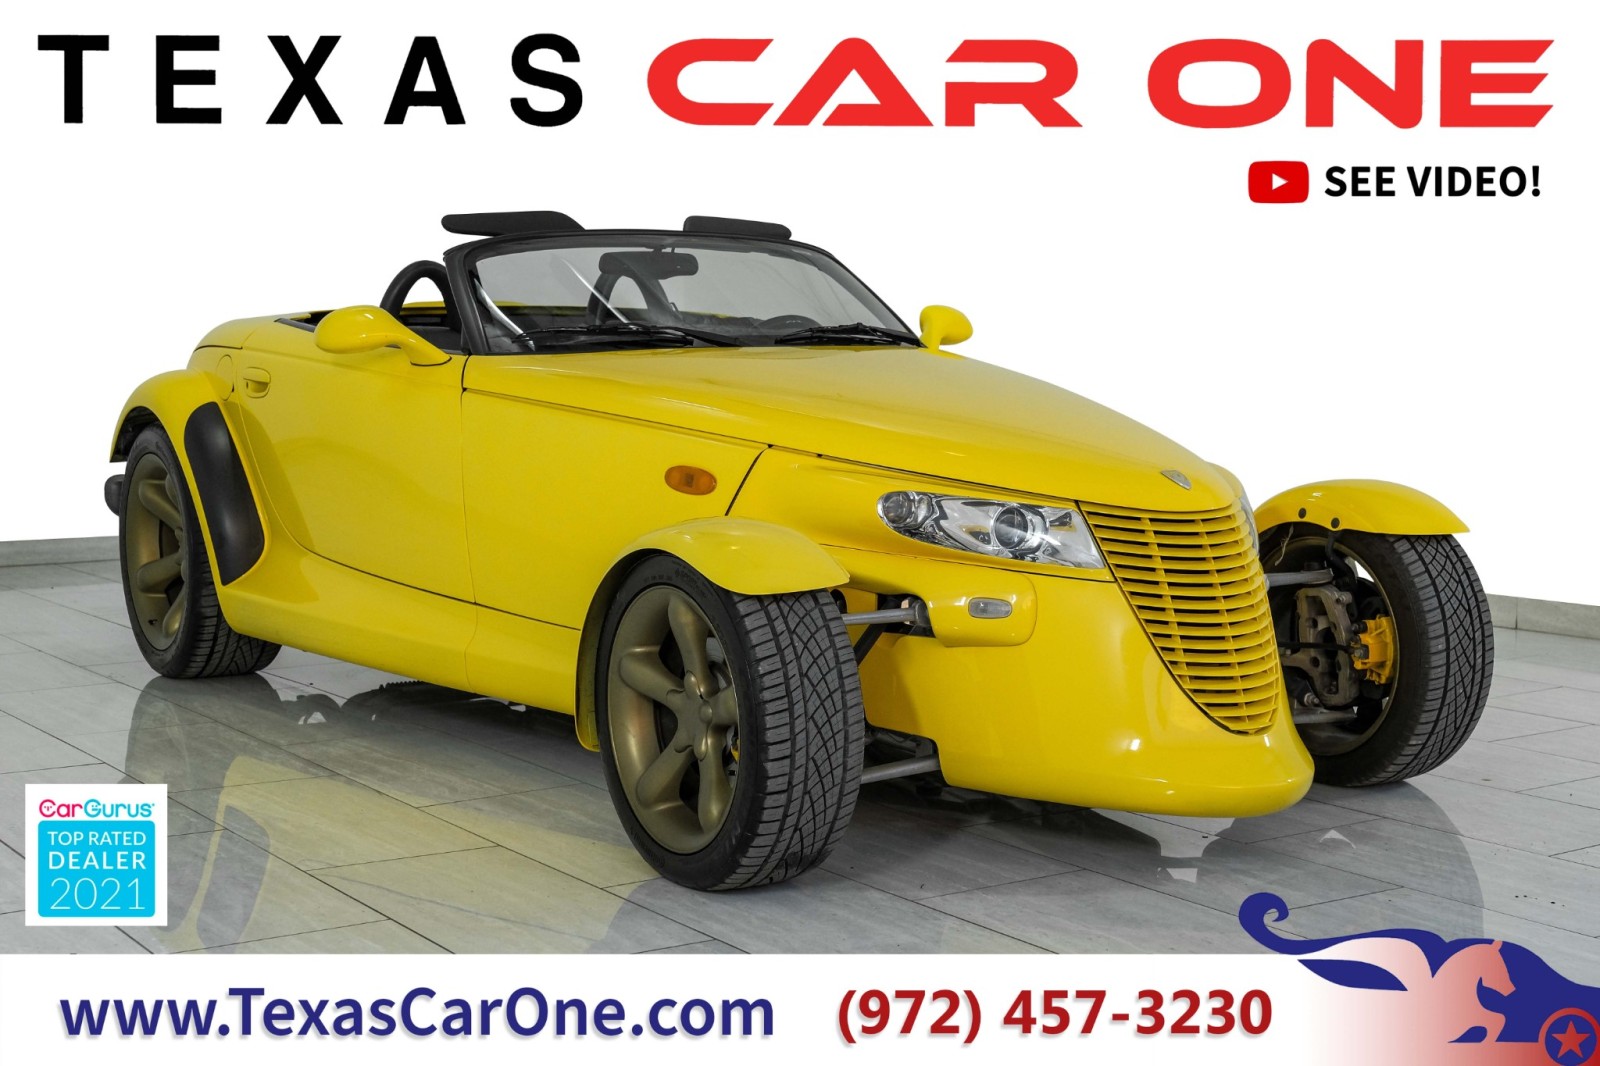 1999 Plymouth Prowler AUTOMATIC LEATHER SEATS CRUISE CONTROL ALLOY WHEEL 1